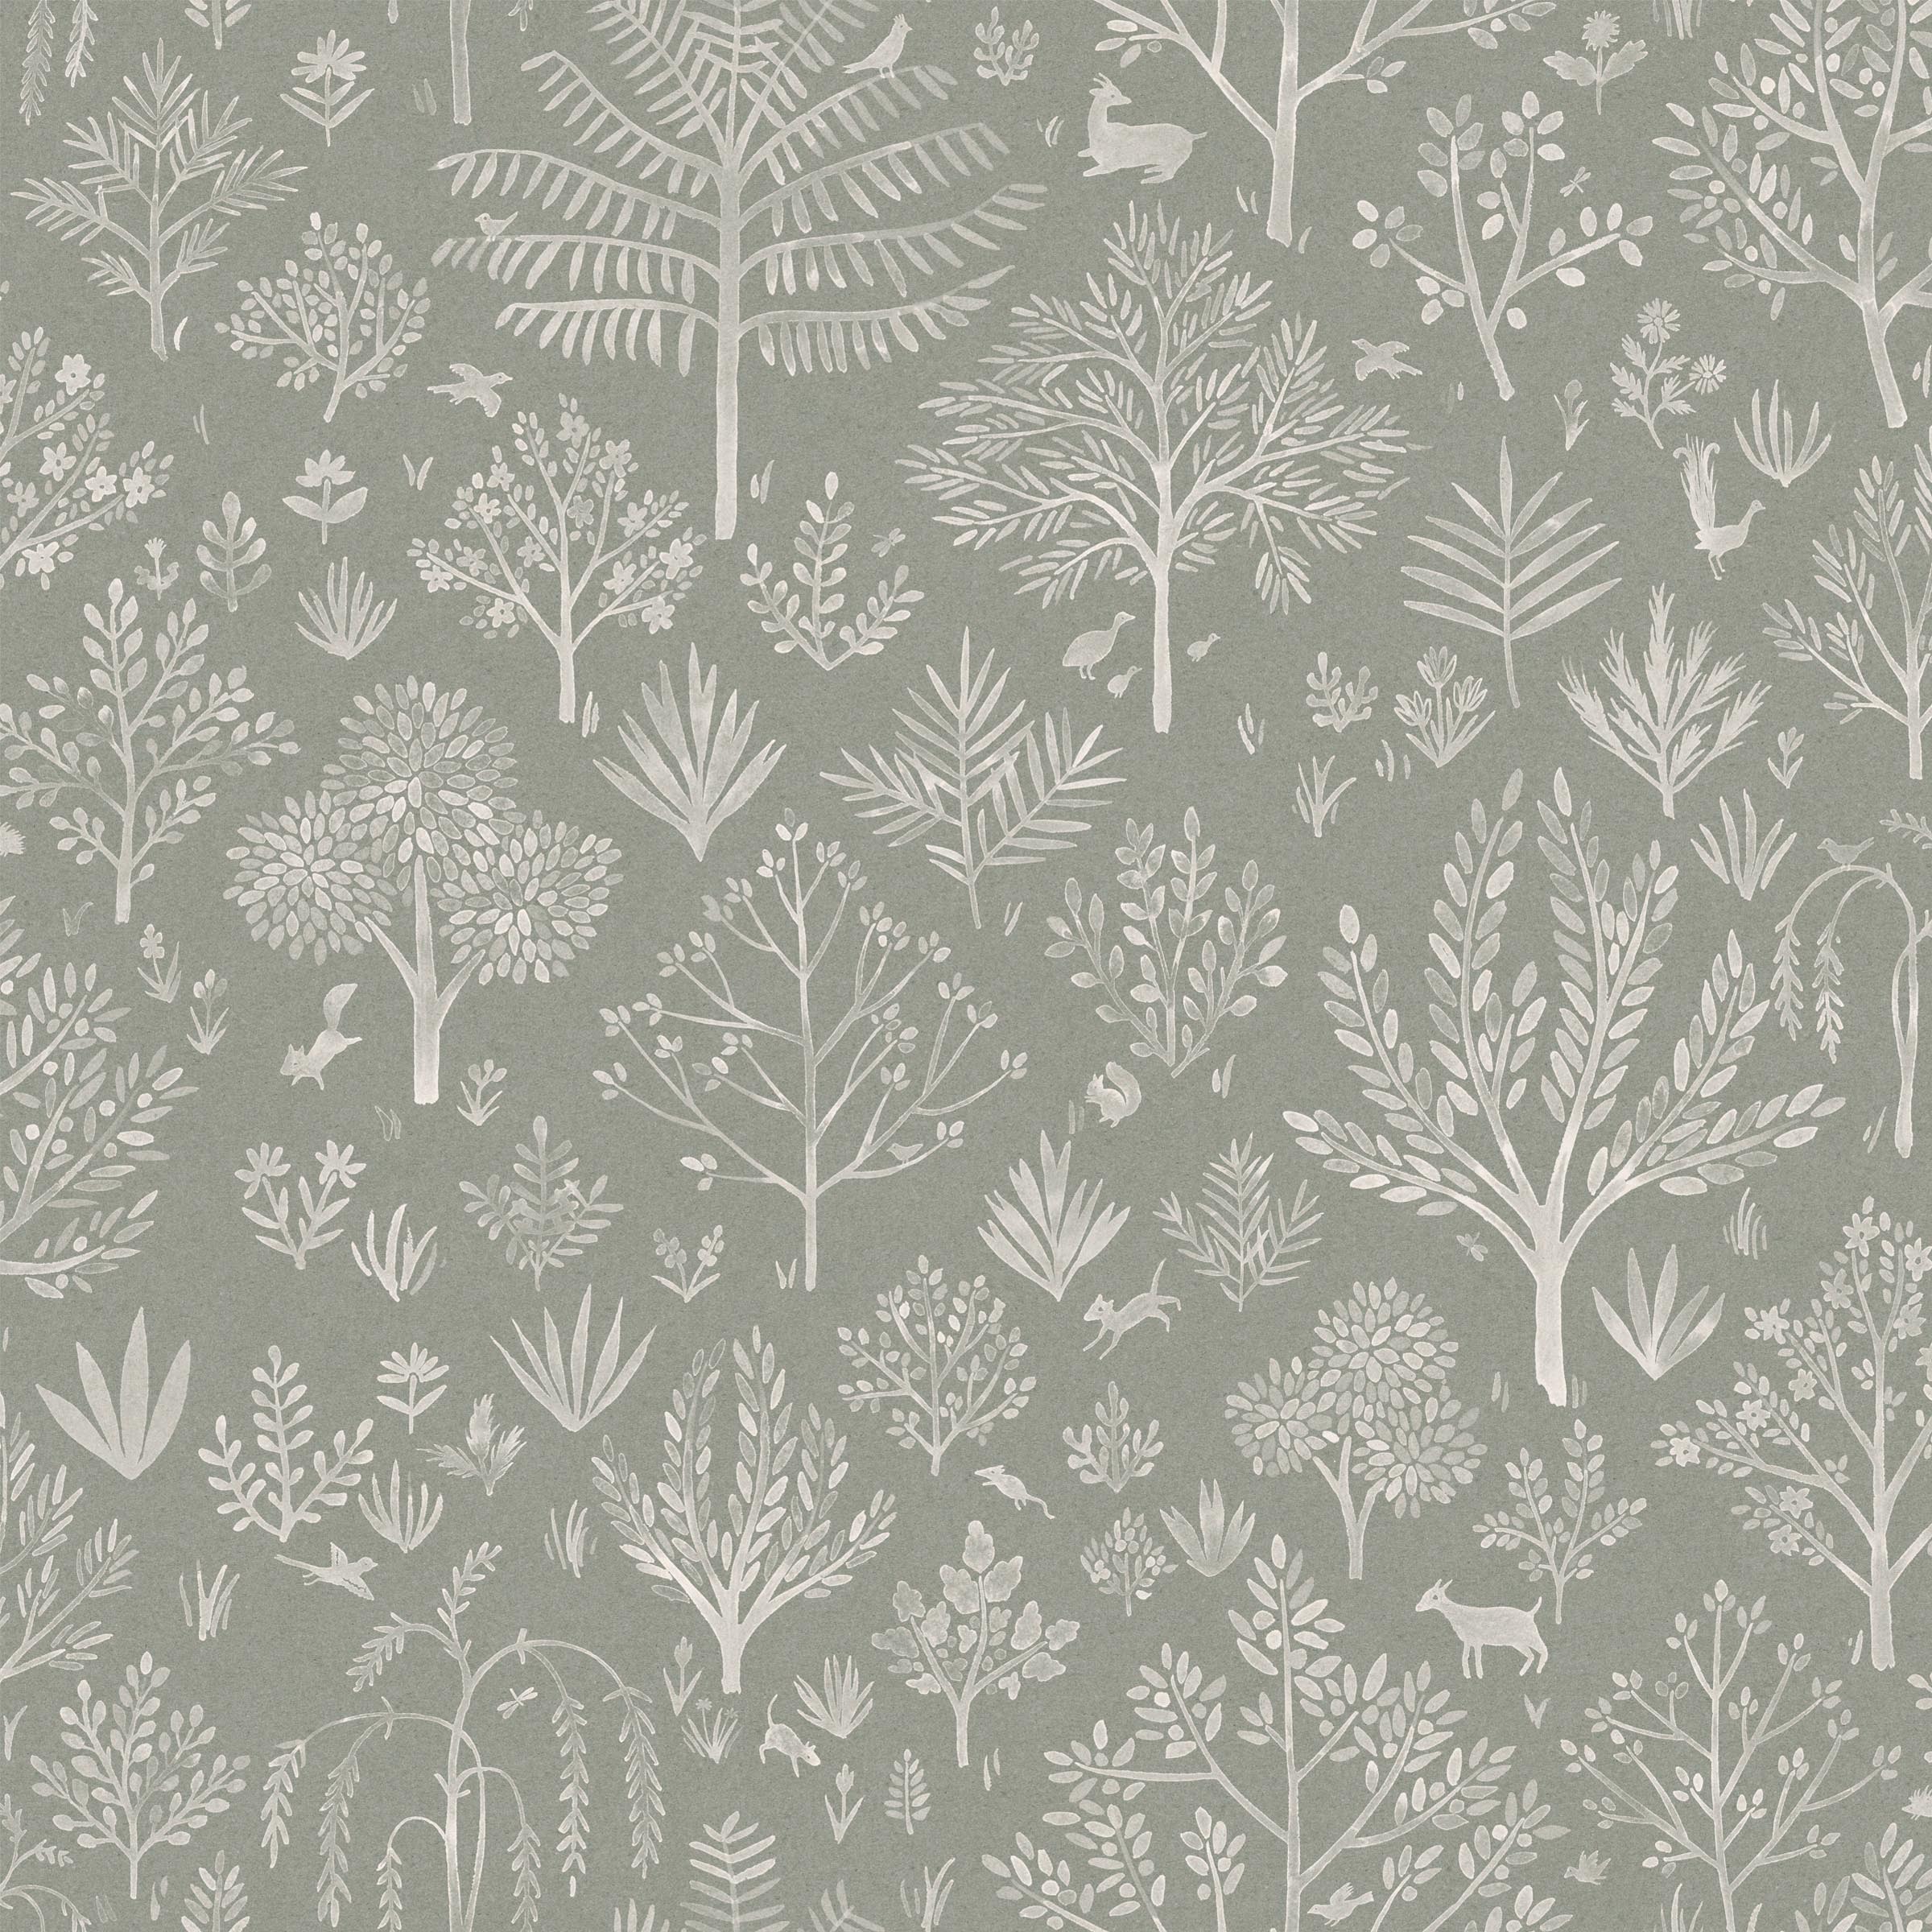 Detail of fabric in a playful animal and tree print in white on a sage field.